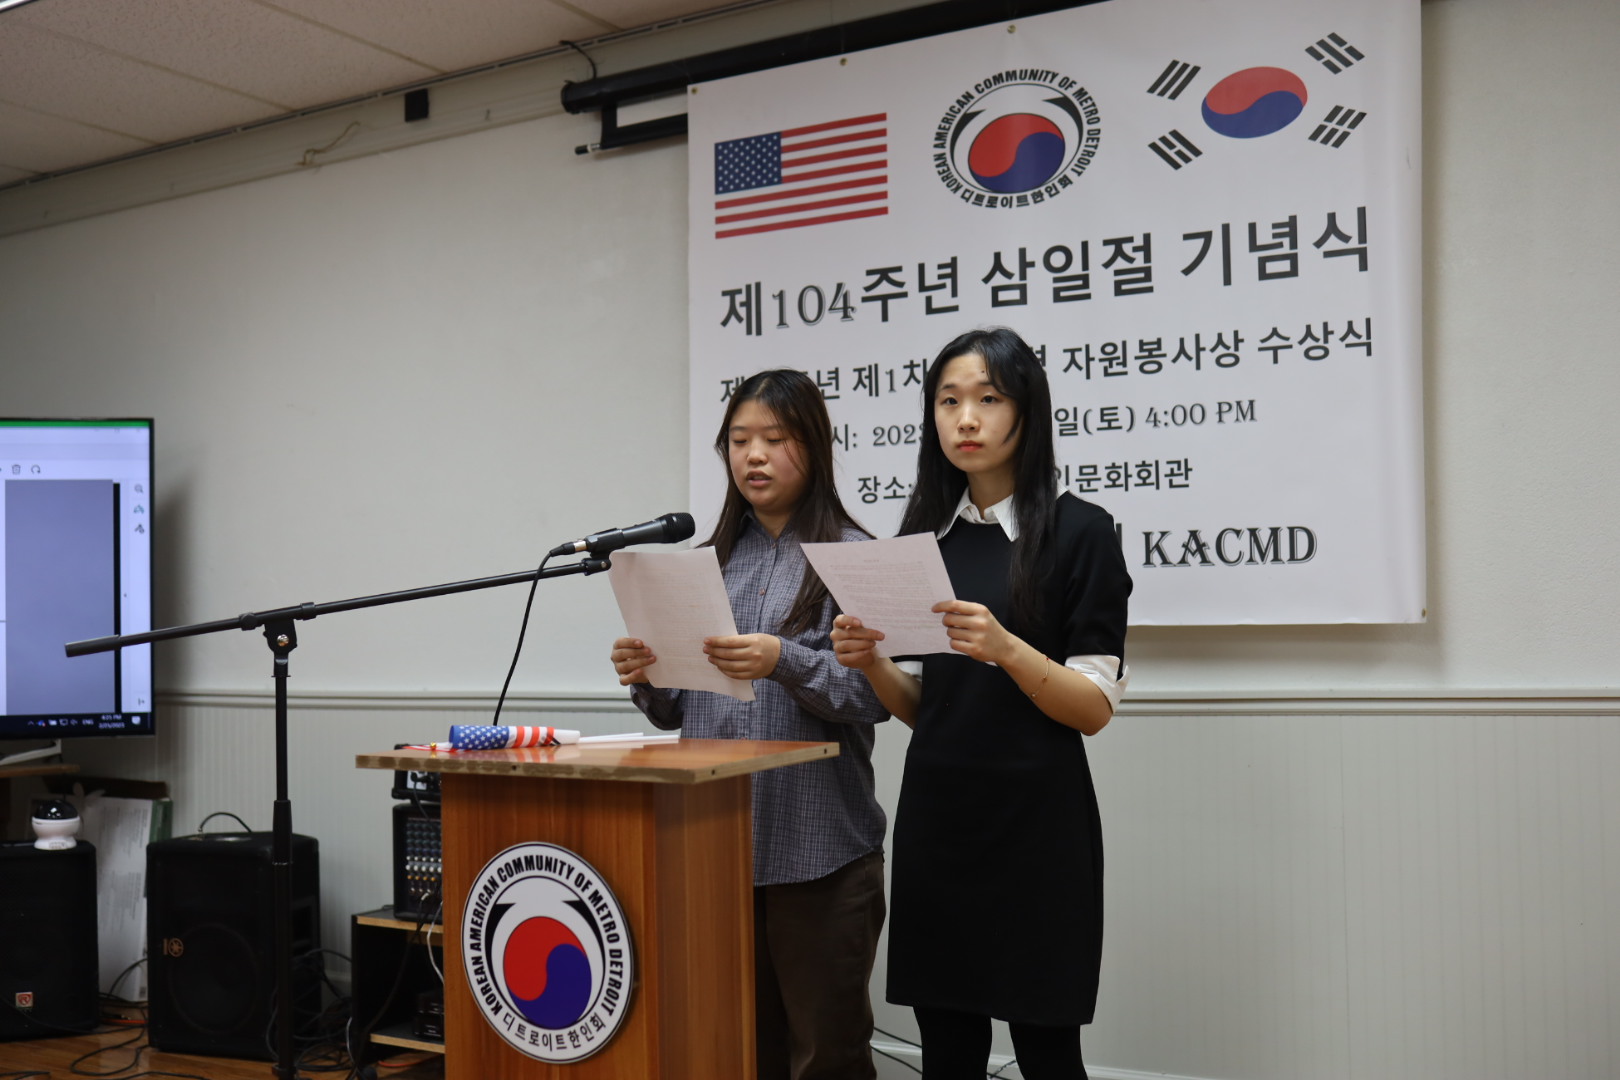 KACCM Student President Han Cho-rok and Student VP Kim Soo-yeon recites the proclamation of the declaration of independence